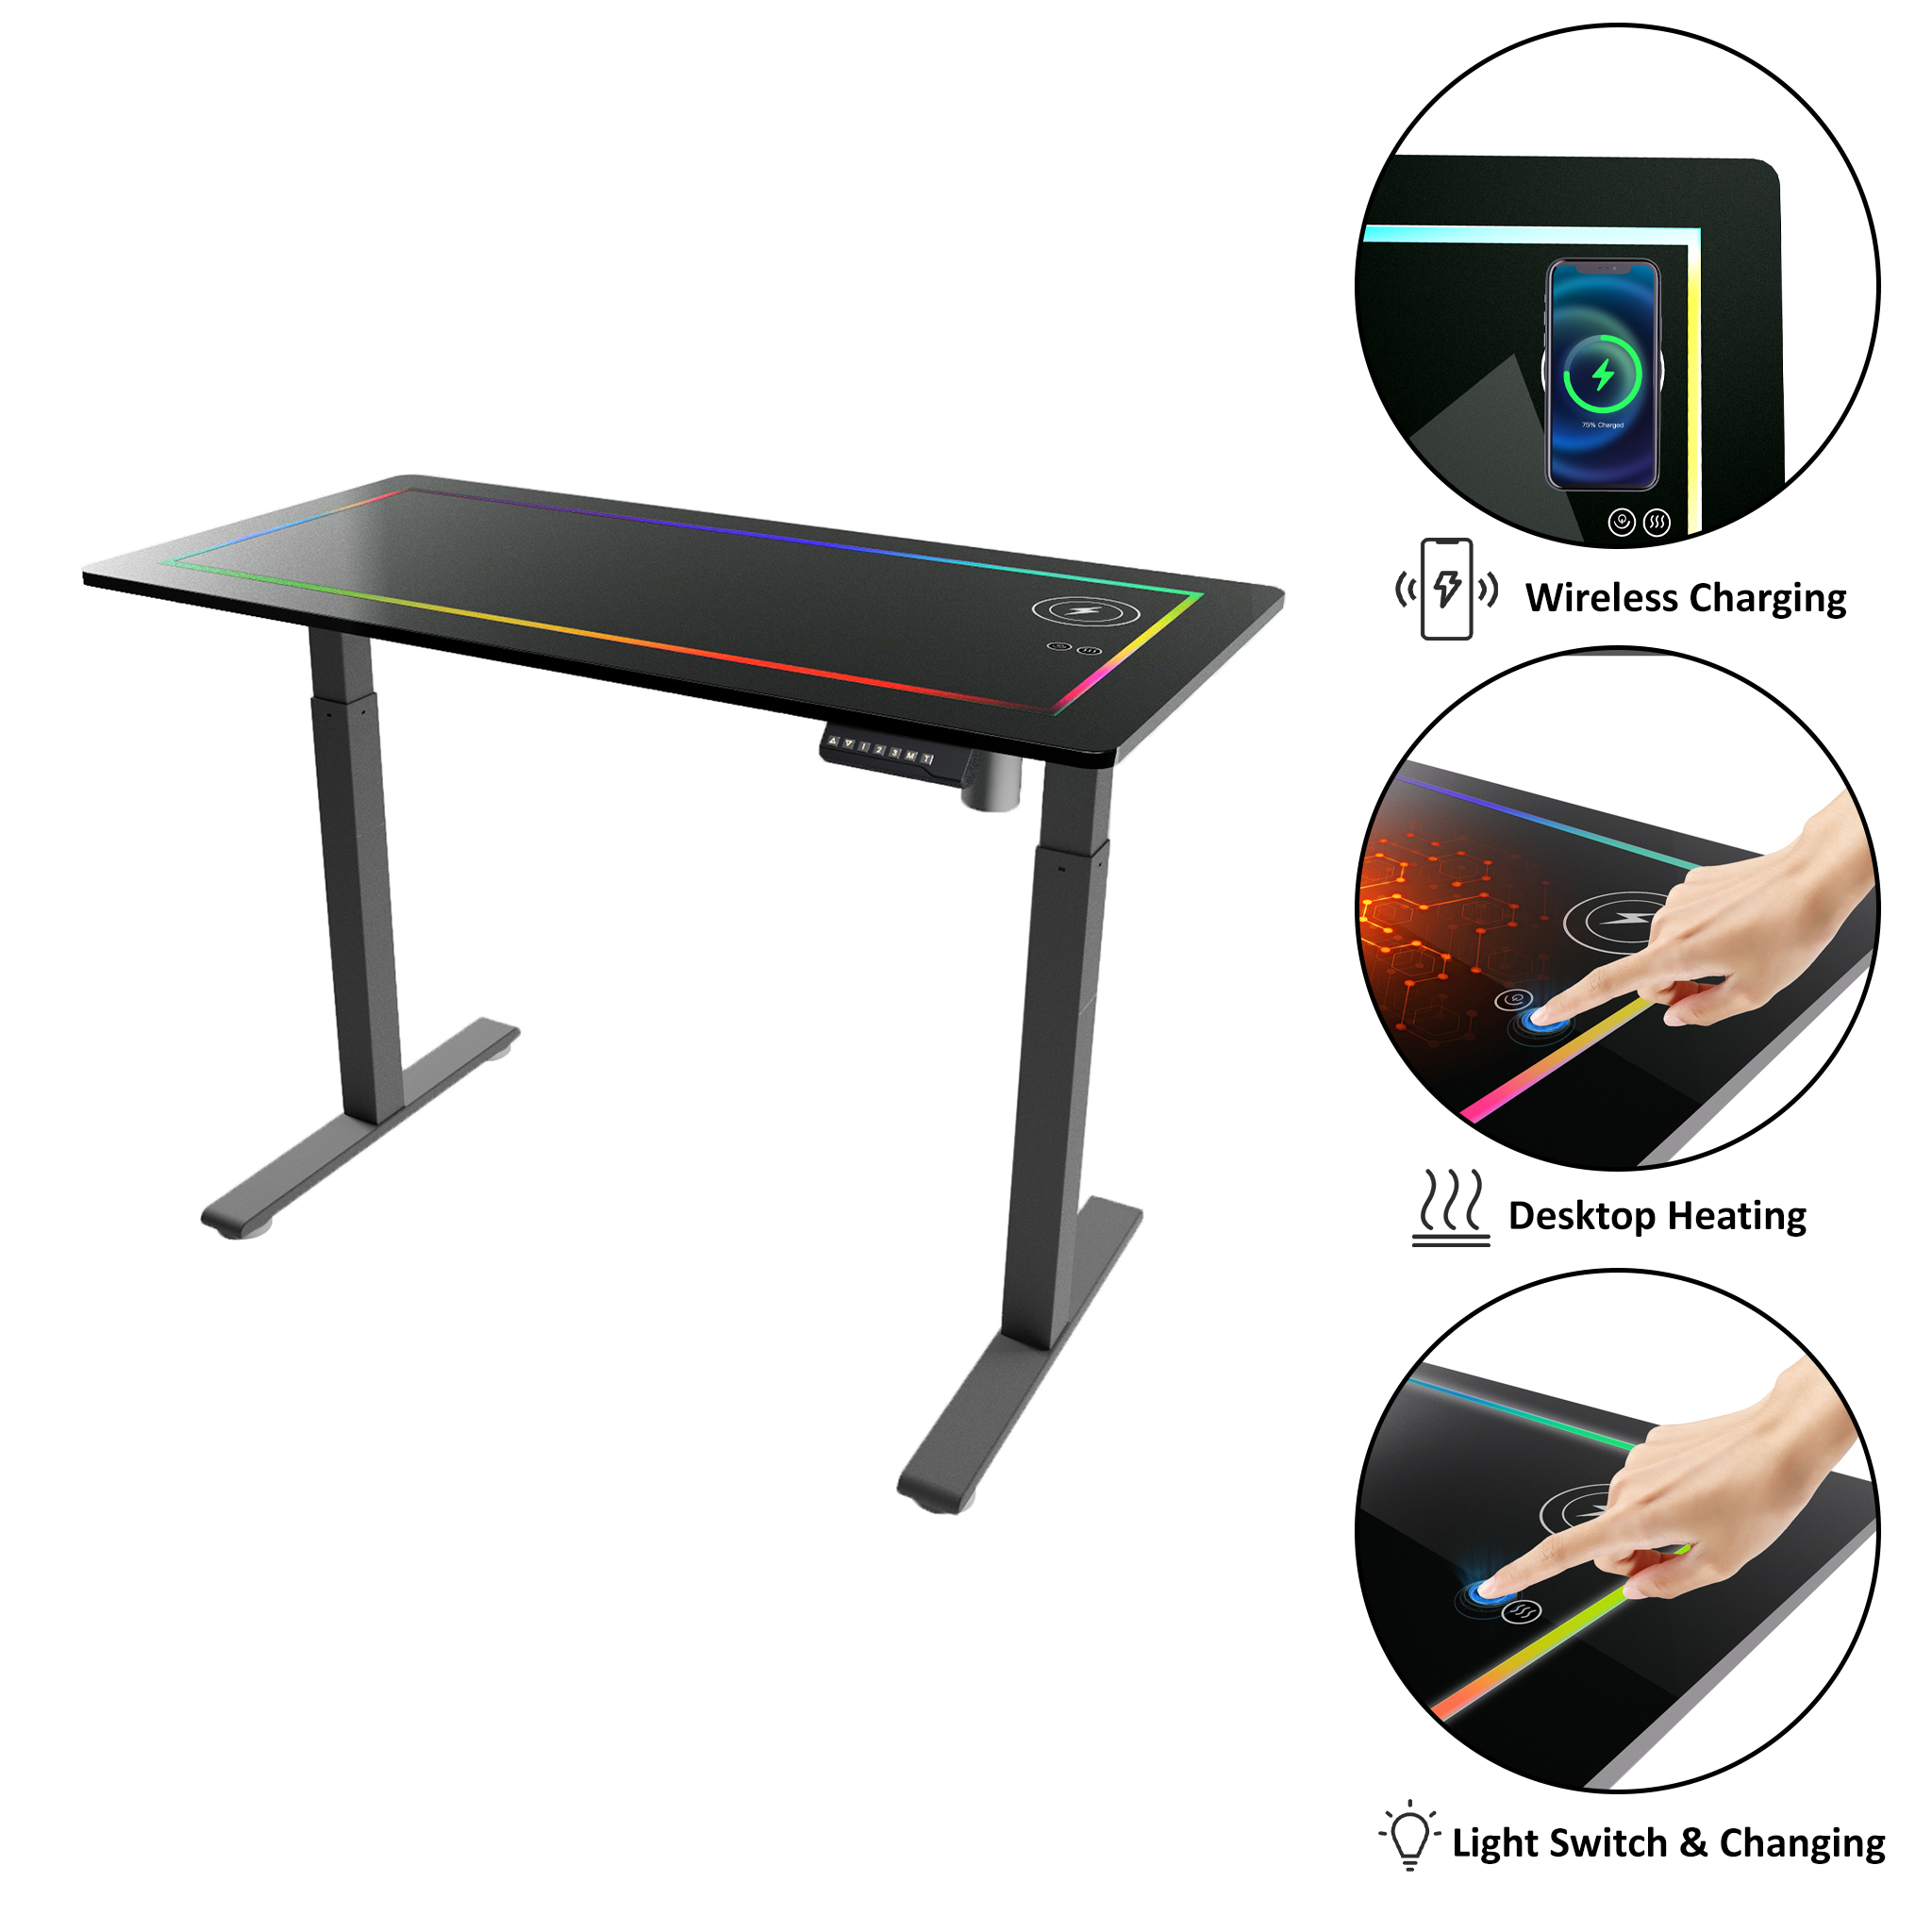 Glass Desktop Electric Standing Desk with Wireless Charging, Hand Warmer, LED Strip